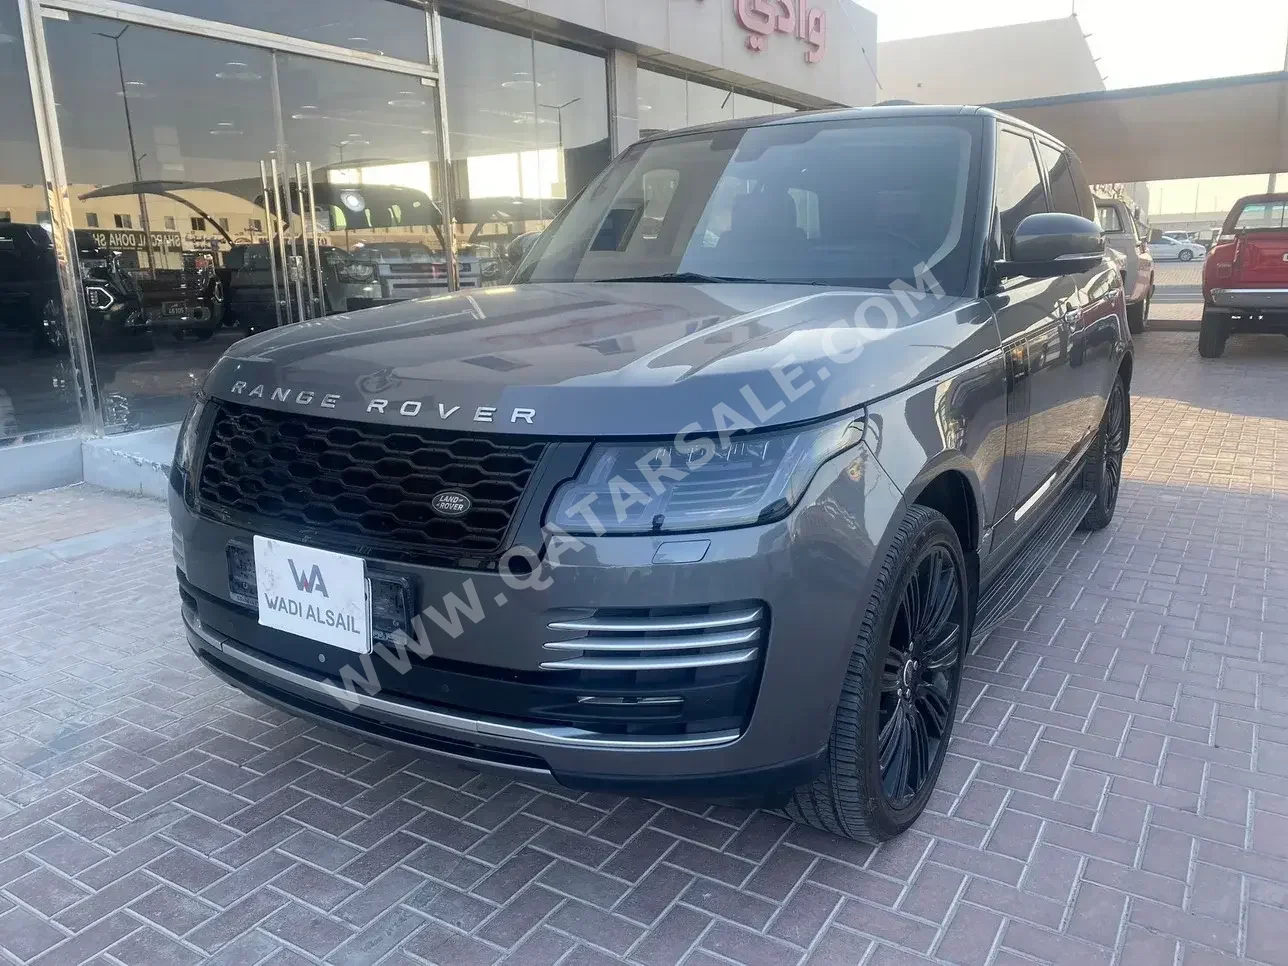 Land Rover  Range Rover  Vogue  2015  Automatic  131,000 Km  8 Cylinder  Four Wheel Drive (4WD)  SUV  Gray